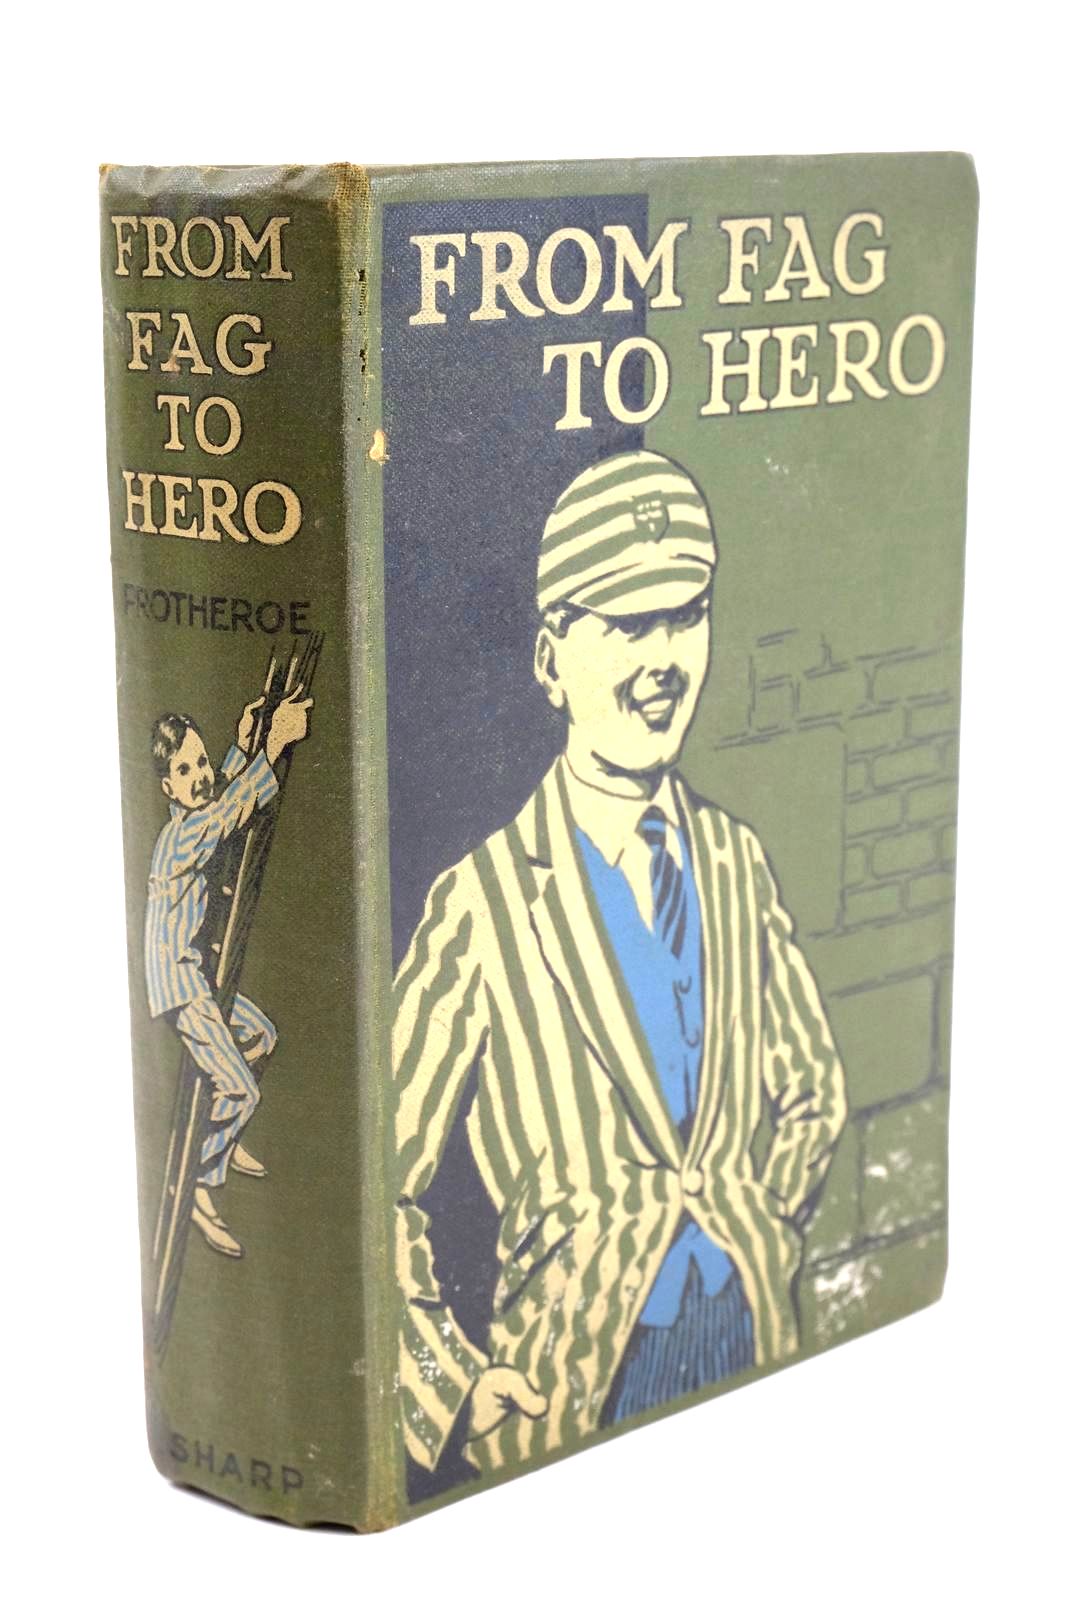 Photo of FROM FAG TO HERO written by Protheroe, Ernest illustrated by Robinson, Gordon published by The Epworth Press, J. Alfred Sharp (STOCK CODE: 1324247)  for sale by Stella & Rose's Books